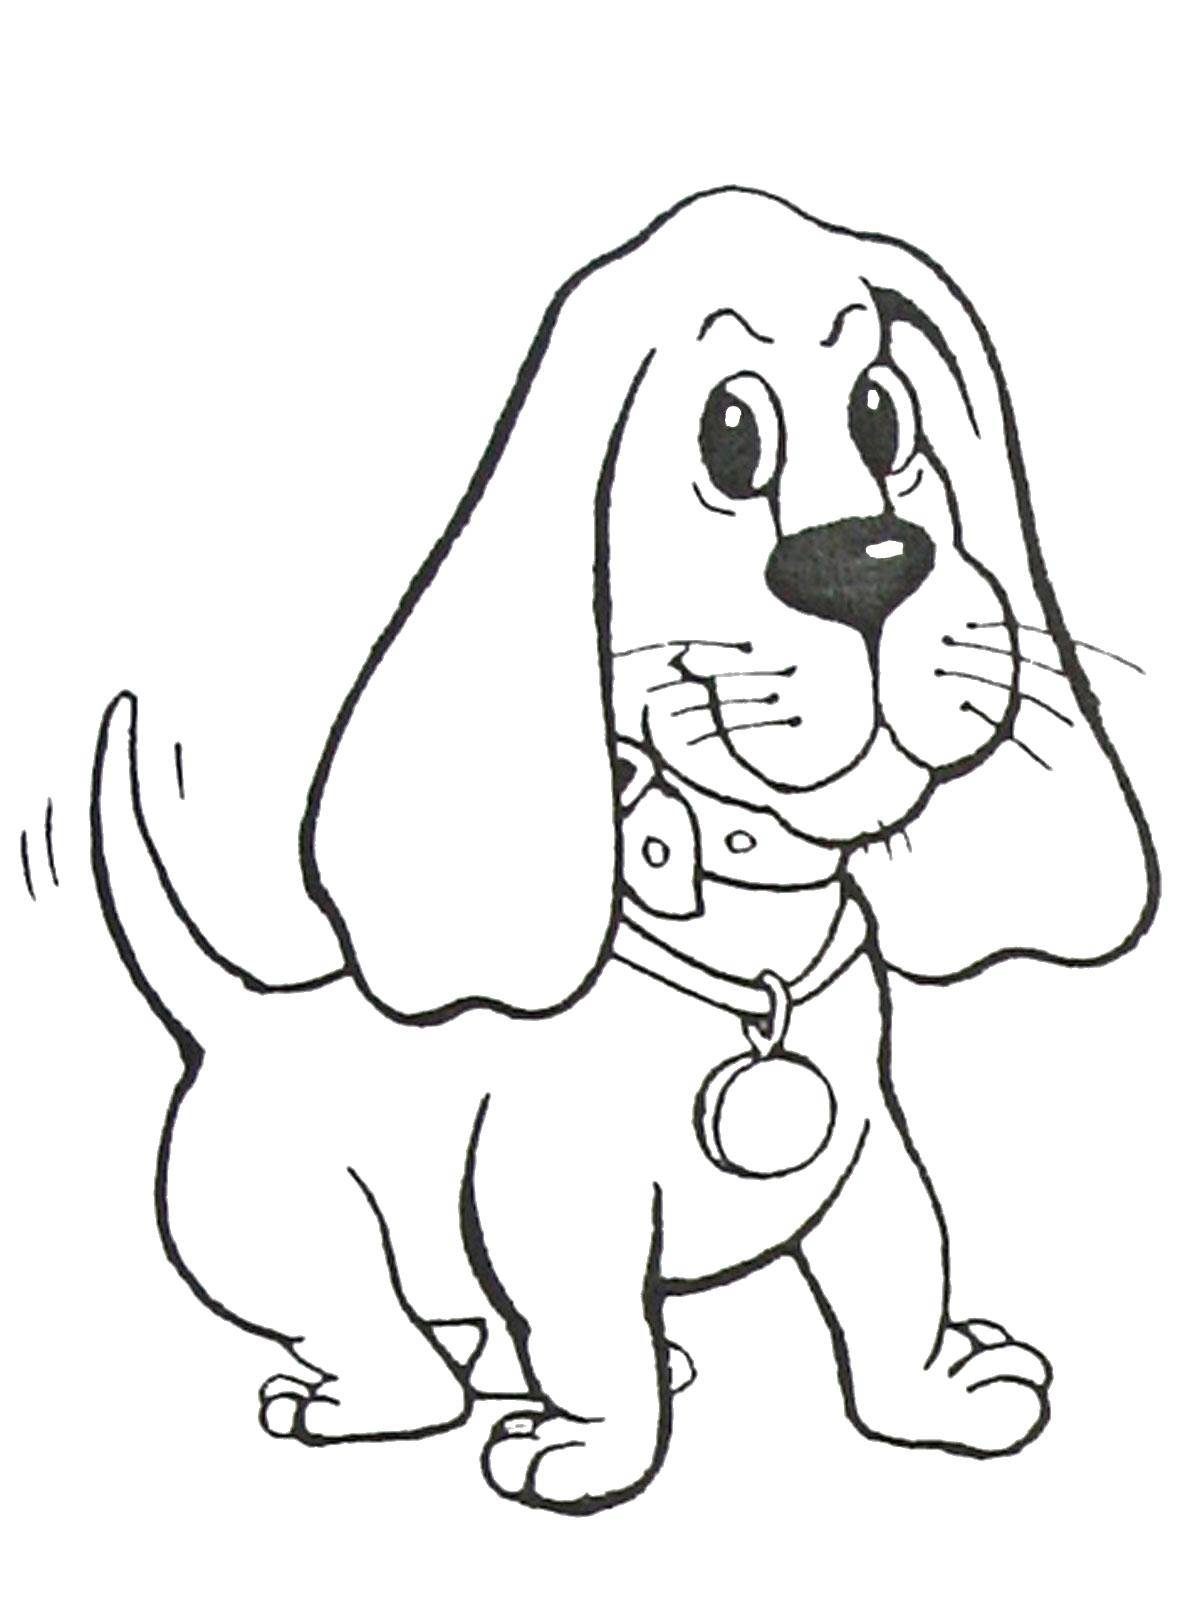 Coloring Faithful doggie. Category Pets allowed. Tags:  Animals, dog.